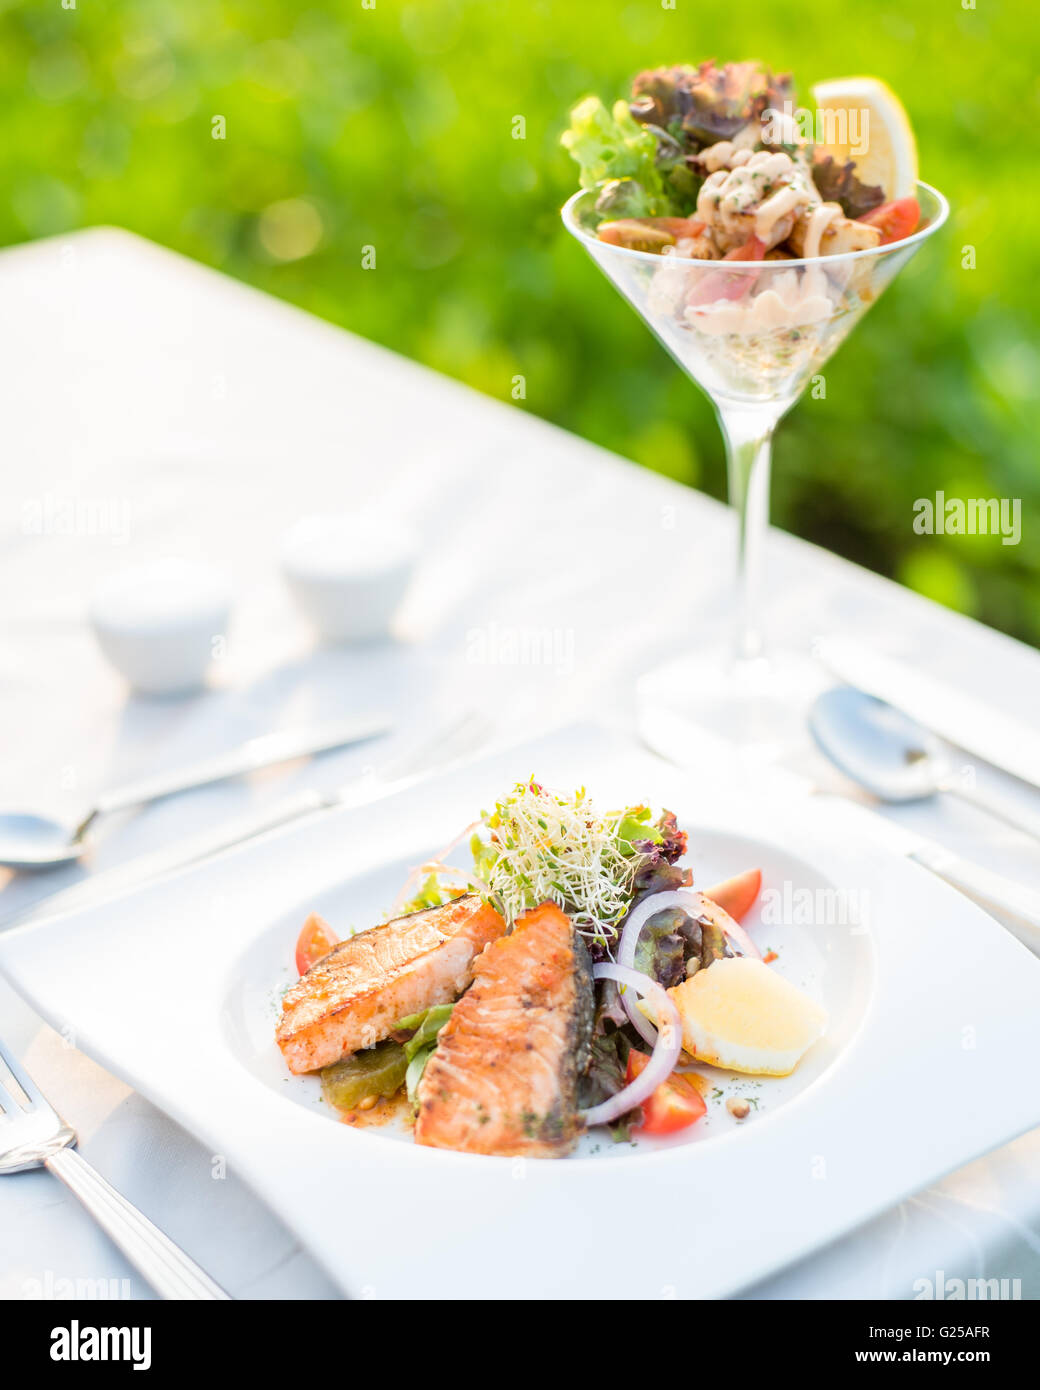 Gourmet salmon fine dining meal Stock Photo